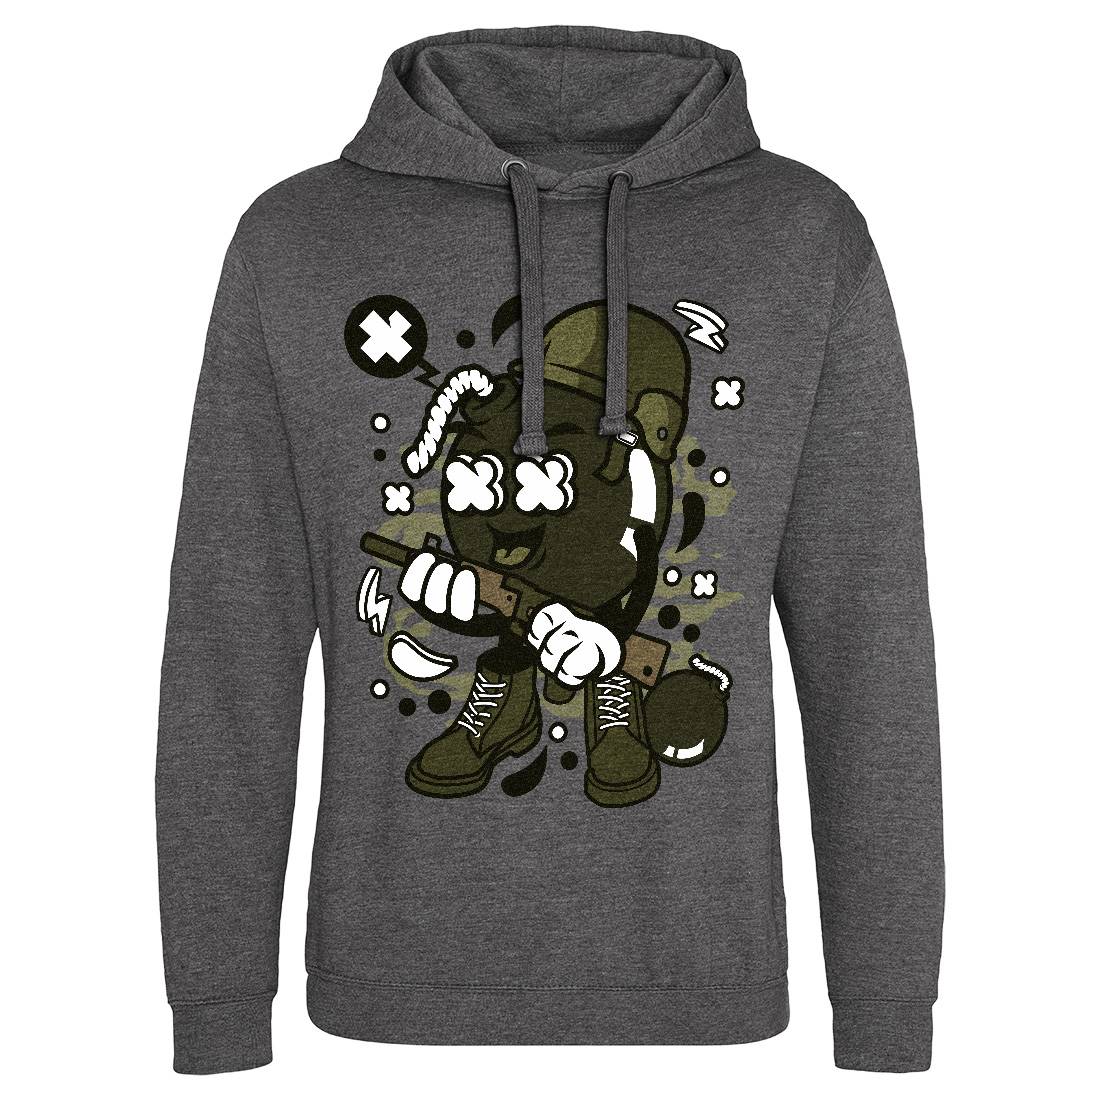 Soldier Bomb Mens Hoodie Without Pocket Army C252